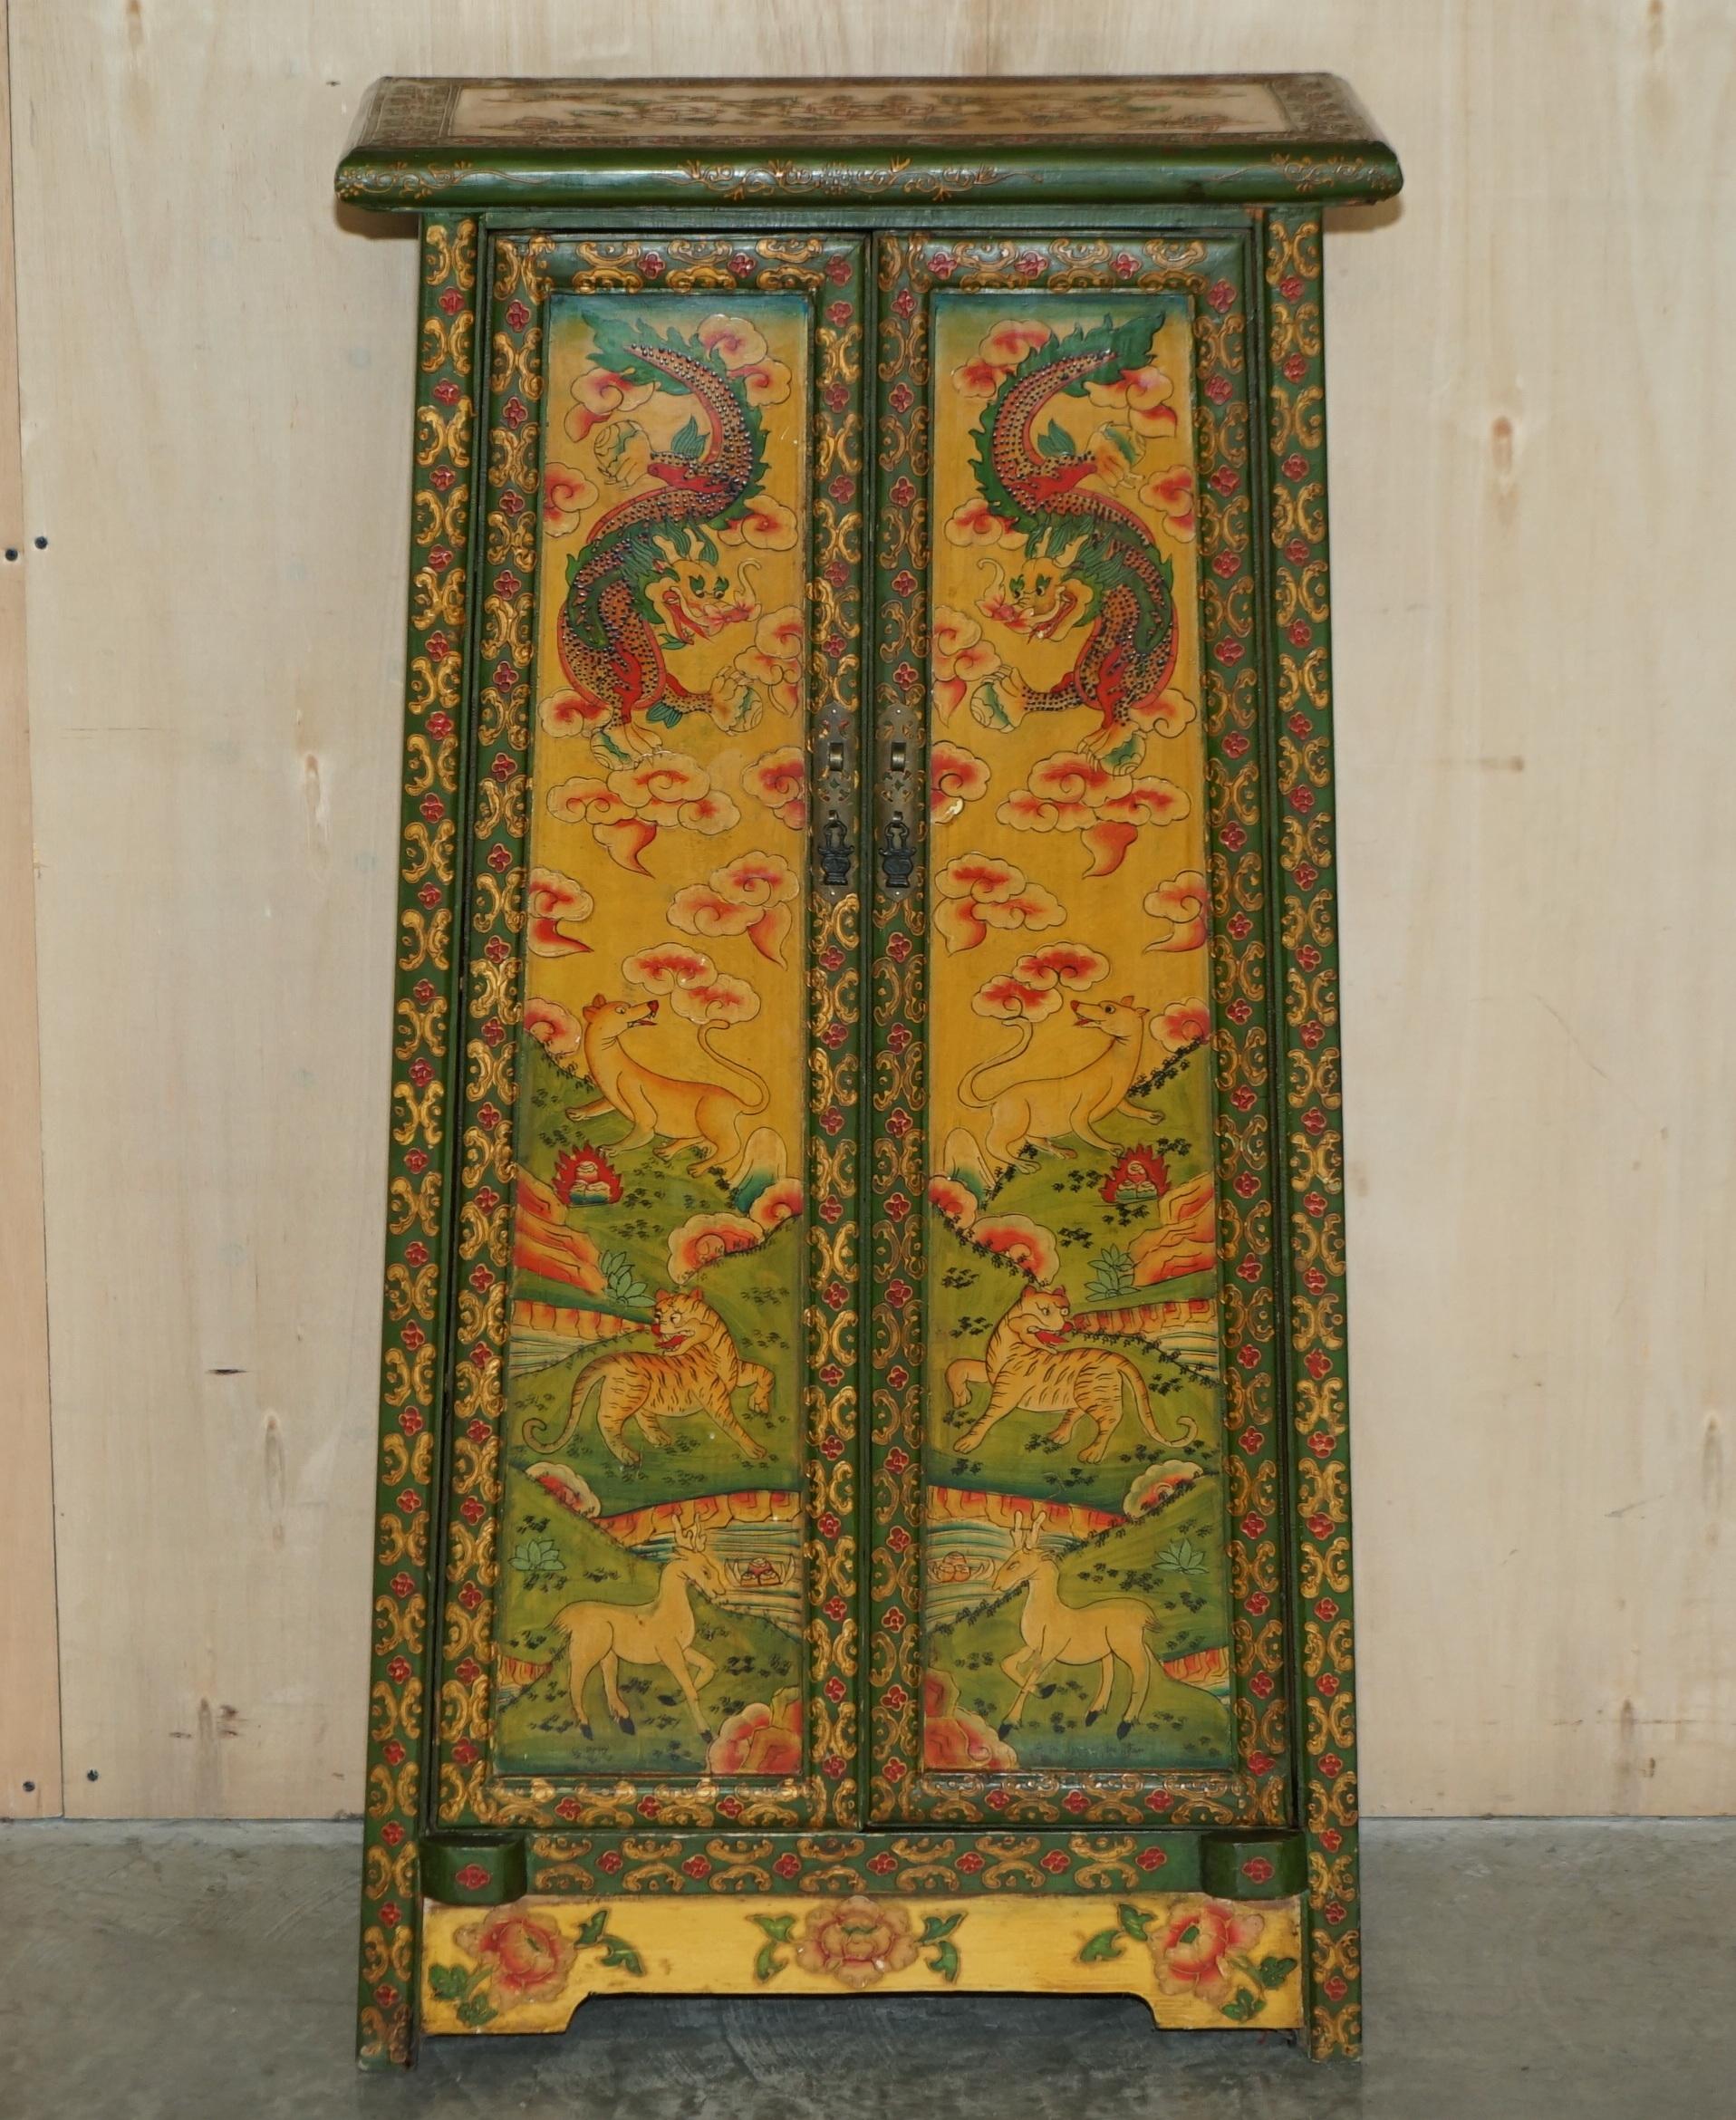 We are delighted to offer for sale this lovely antique circa 1920 hand painted and lacquered Chinese side cupboard depicting dragons and early rural animals 

A very good looking and well made piece, these are now highly collectable as art